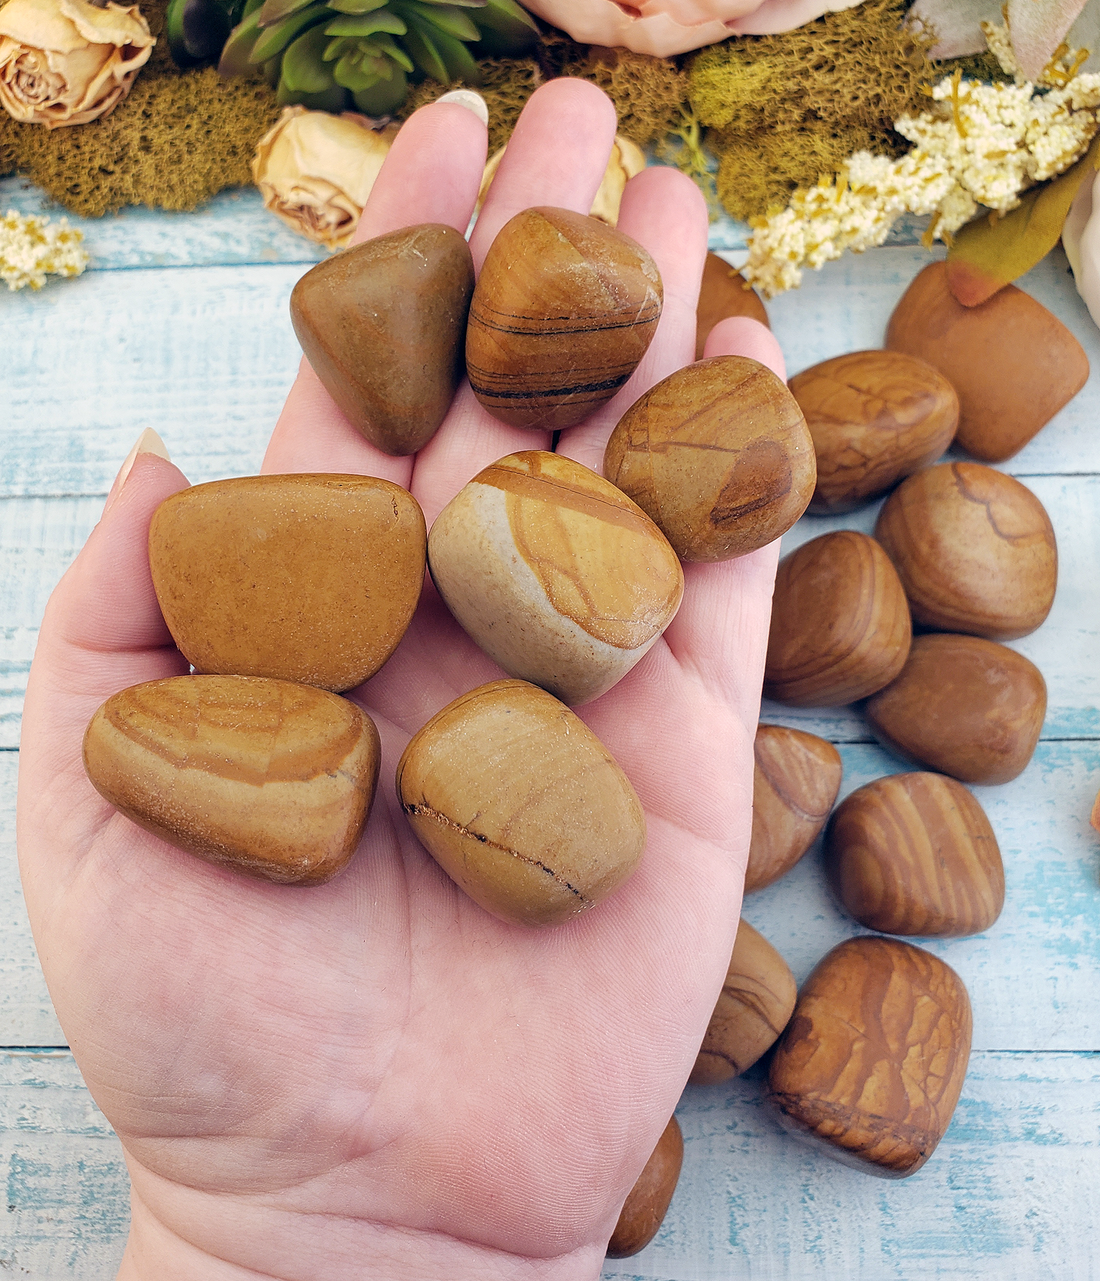 Picture Jasper Tumbled Gemstone - One Stone or Bulk Wholesale - Group in Hand